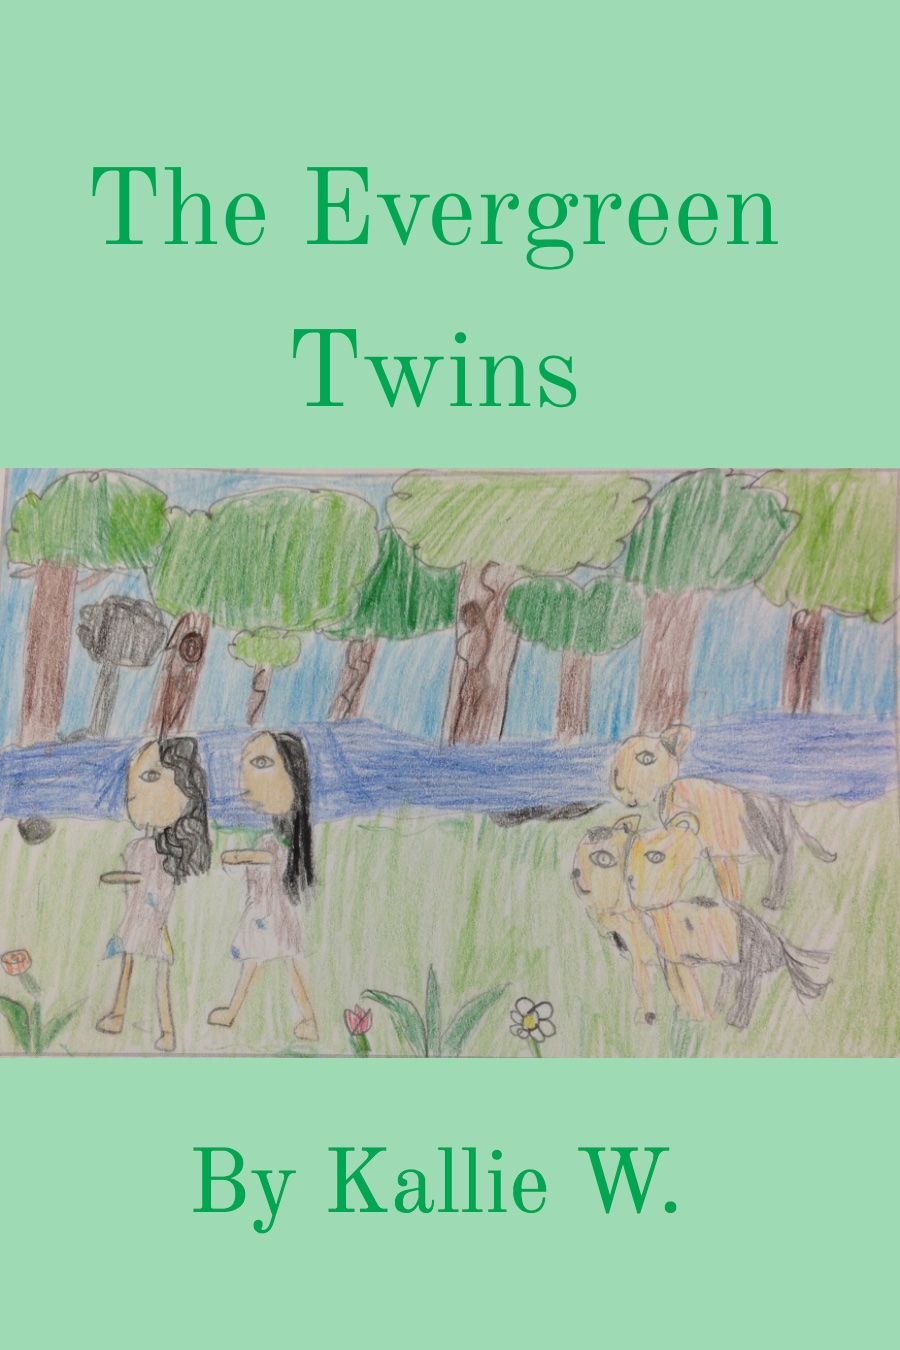 The Evergreen Twin by Kallie W